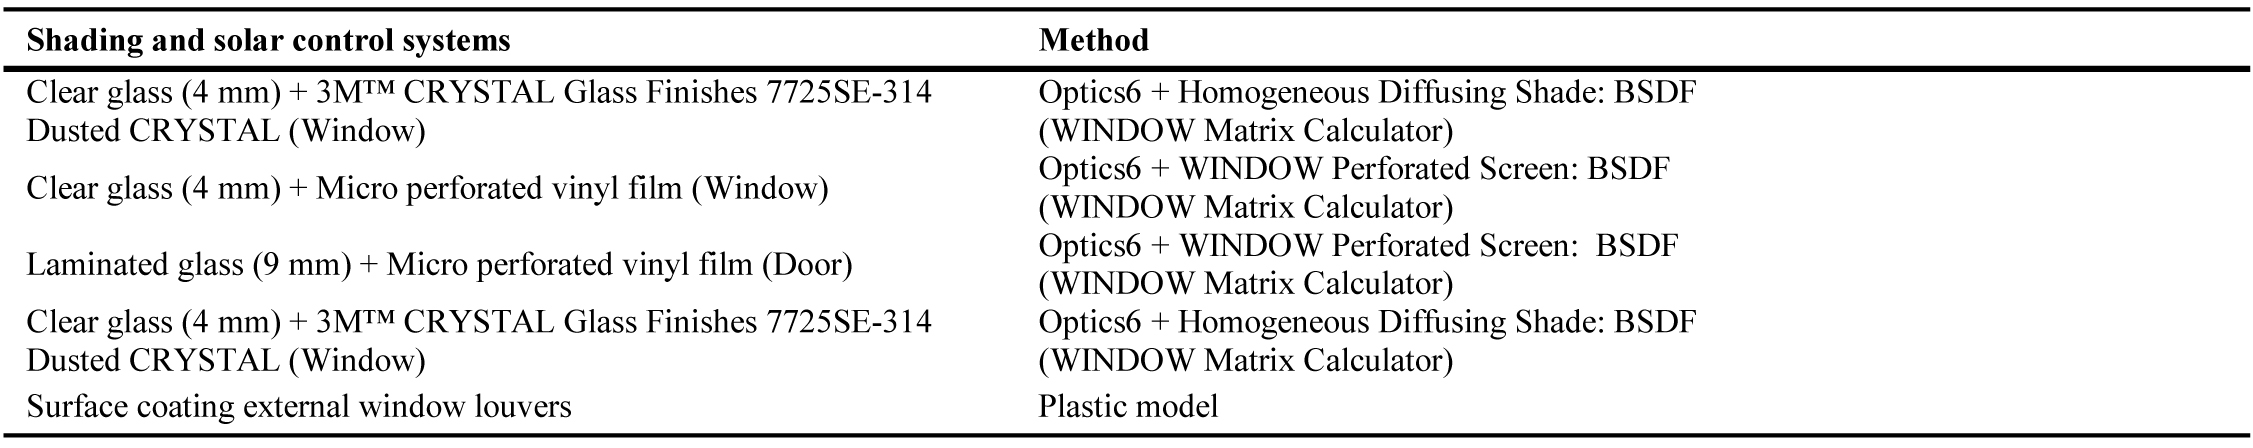 Methods used for optical characterization of shading and solar control systems.